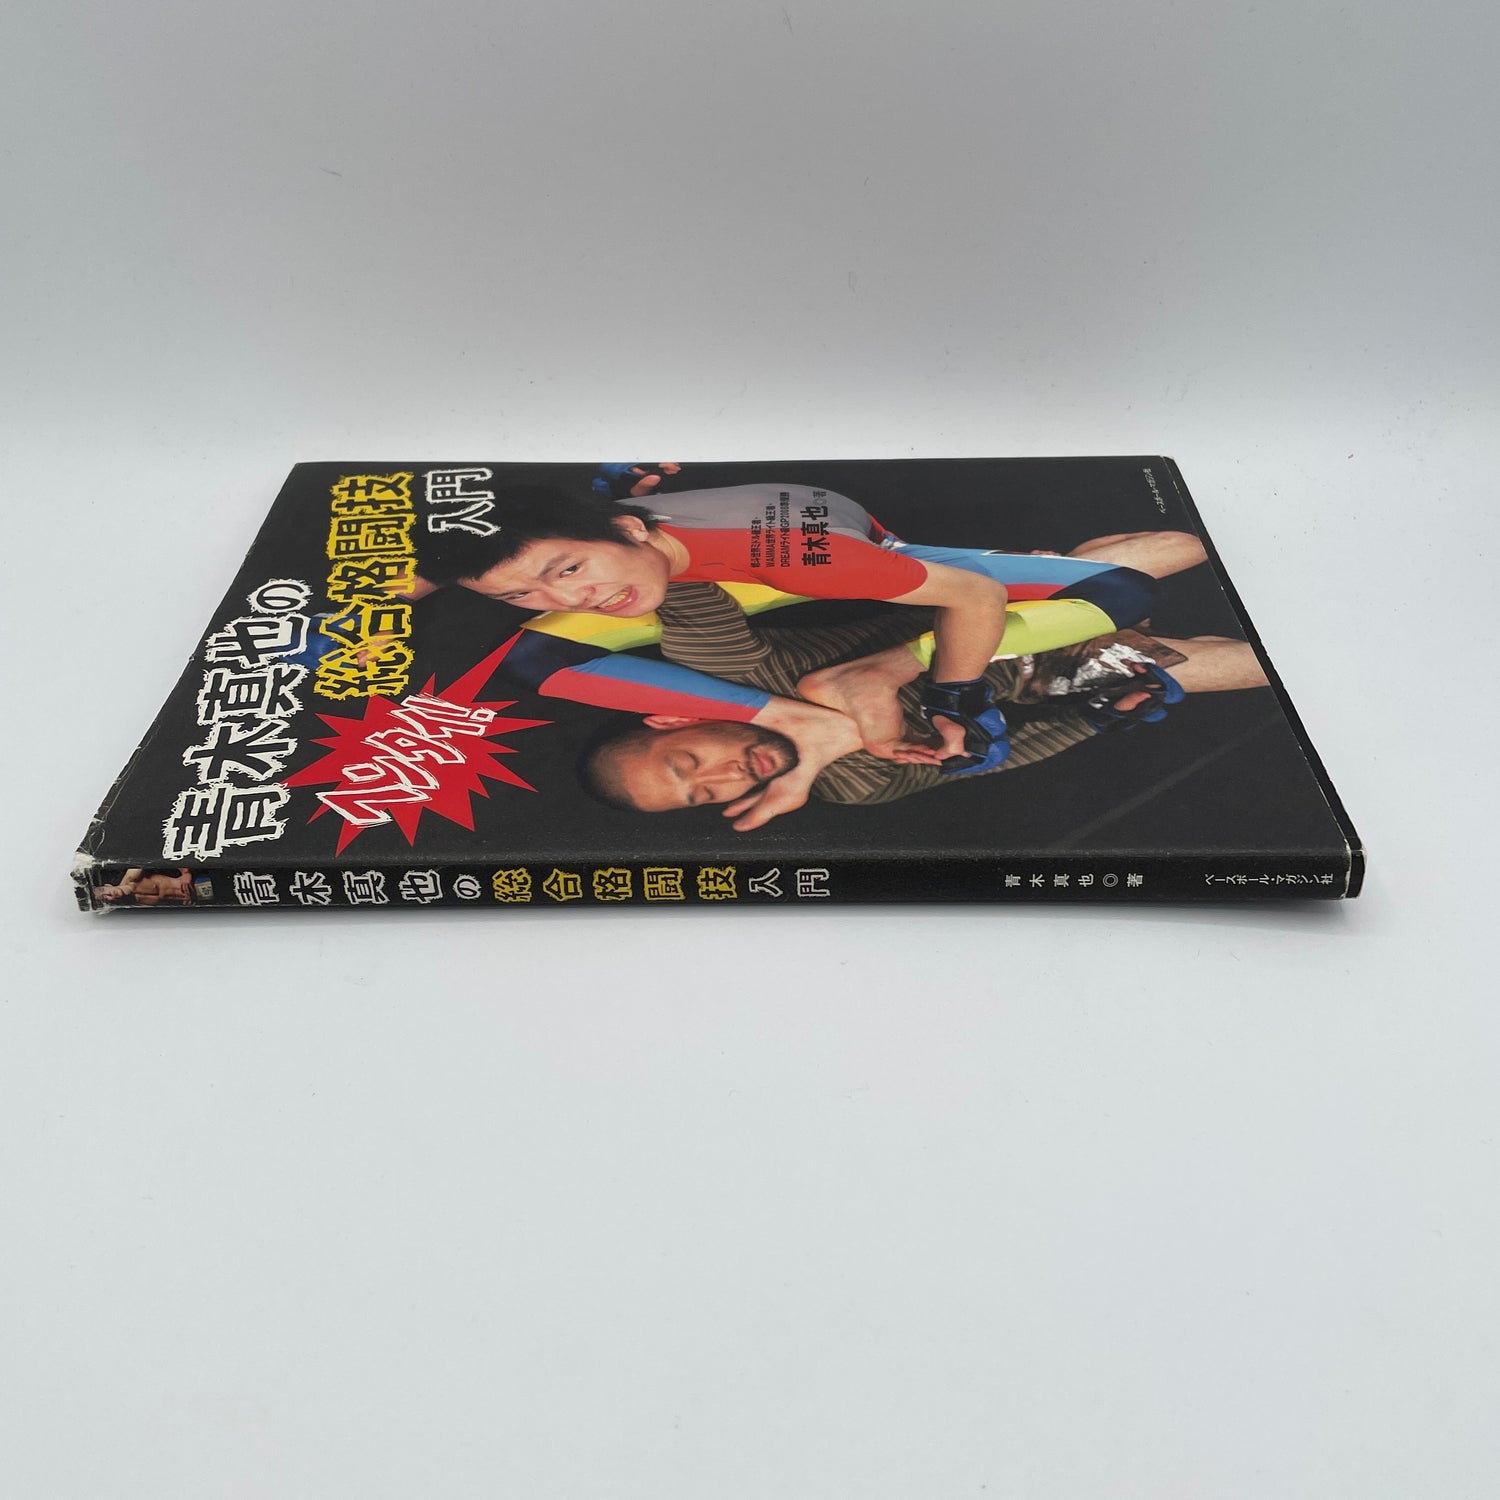 Intro to MMA with Shinya Aoki Book (Preowned)